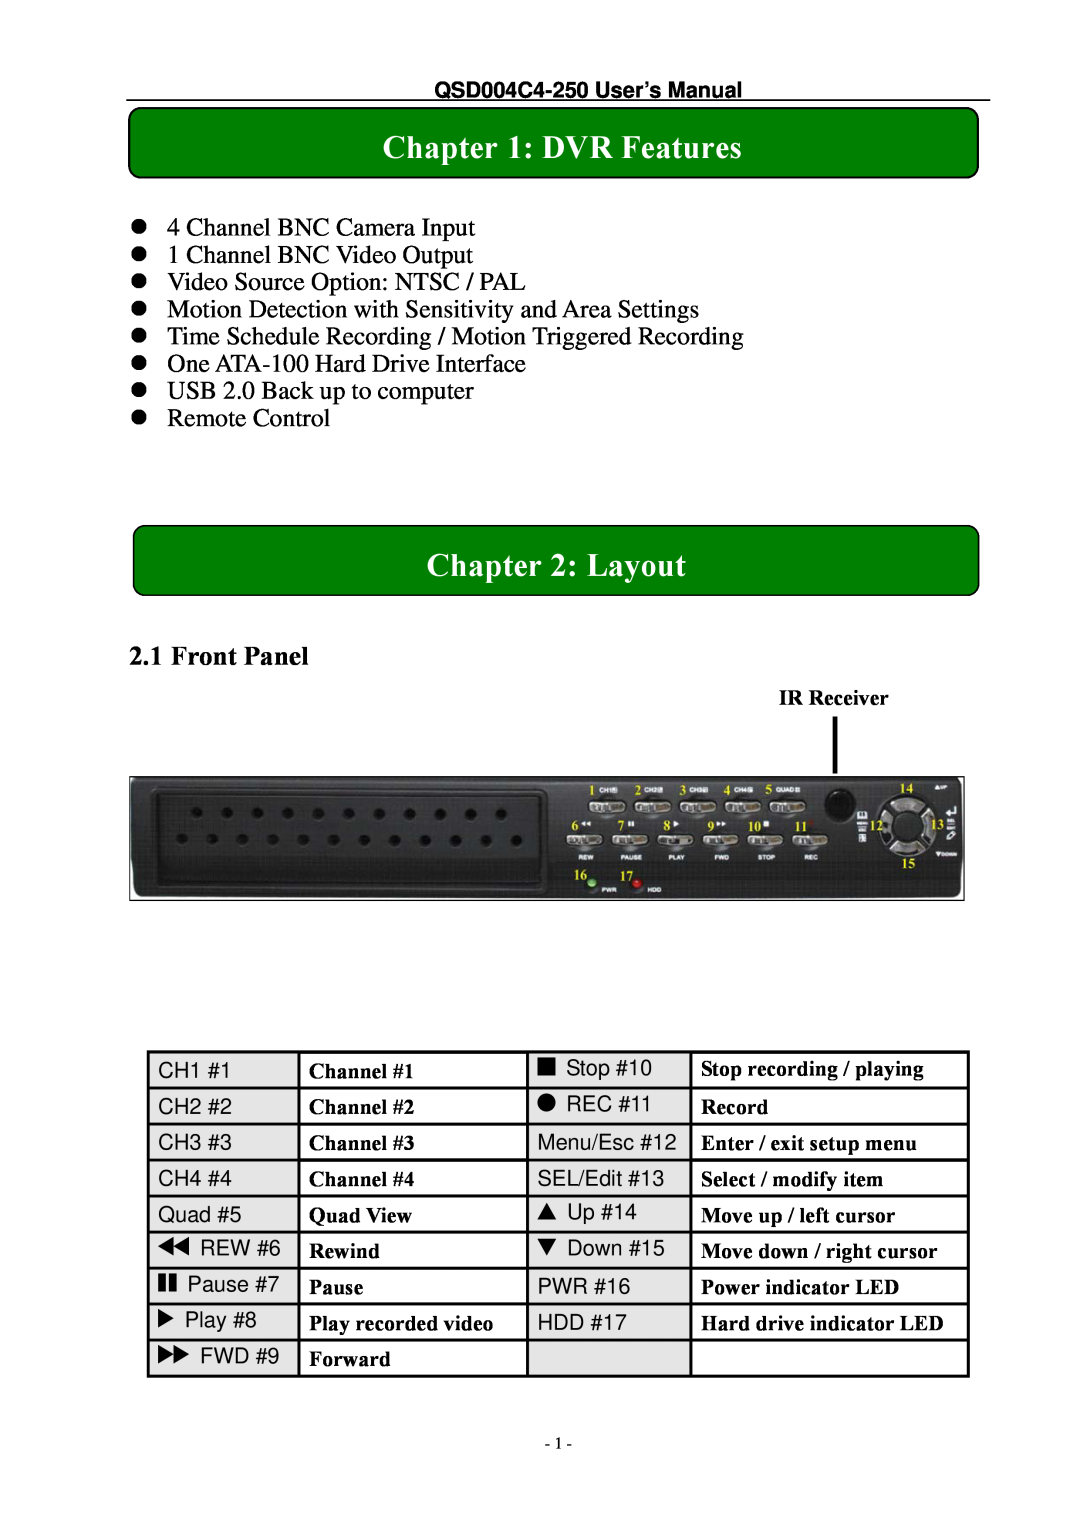 Q-See QSD004C4-250 manual DVR Features, Layout, Front Panel 